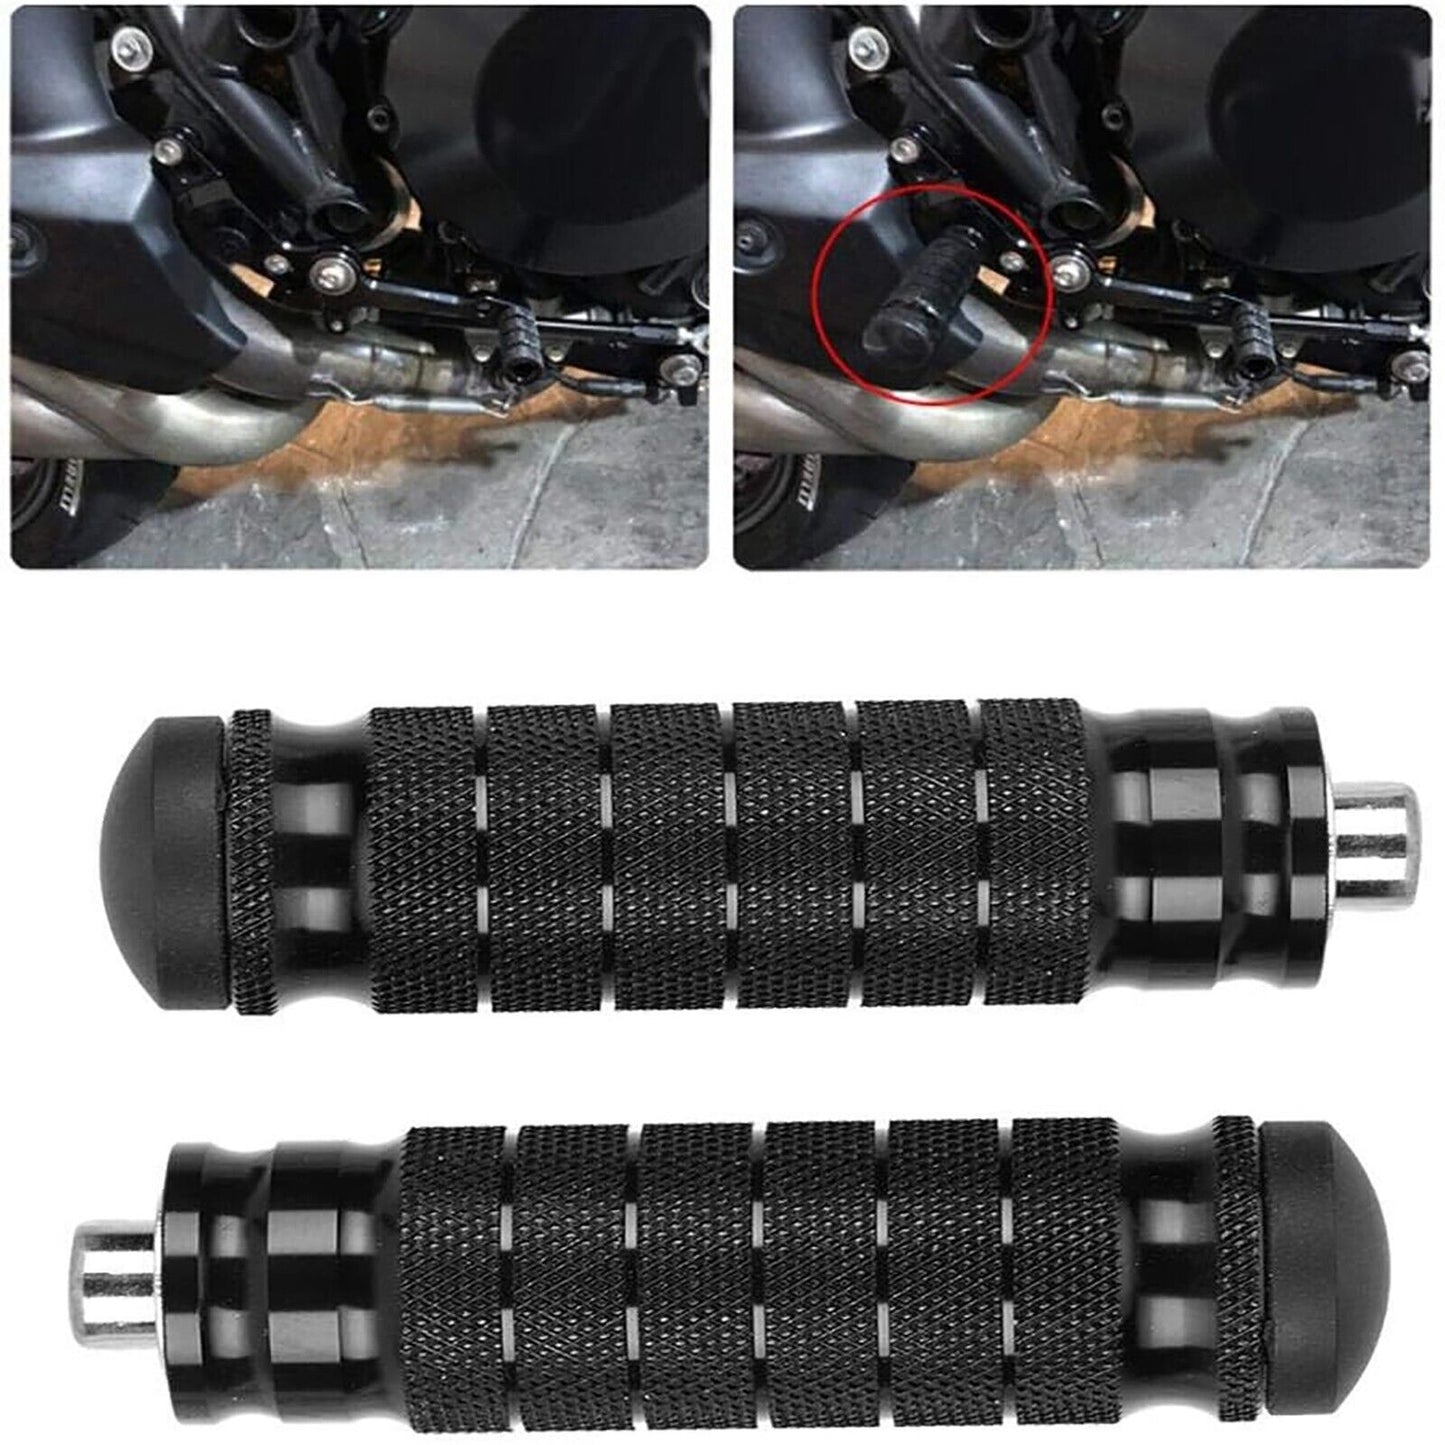 CNC Universal Motorcycle Bicycle Passenger Foot Pegs M8 Rearsets Rear Set  Footrests Footpeg Foot Rest Peg Pedals For Bike Install Hole 8mm